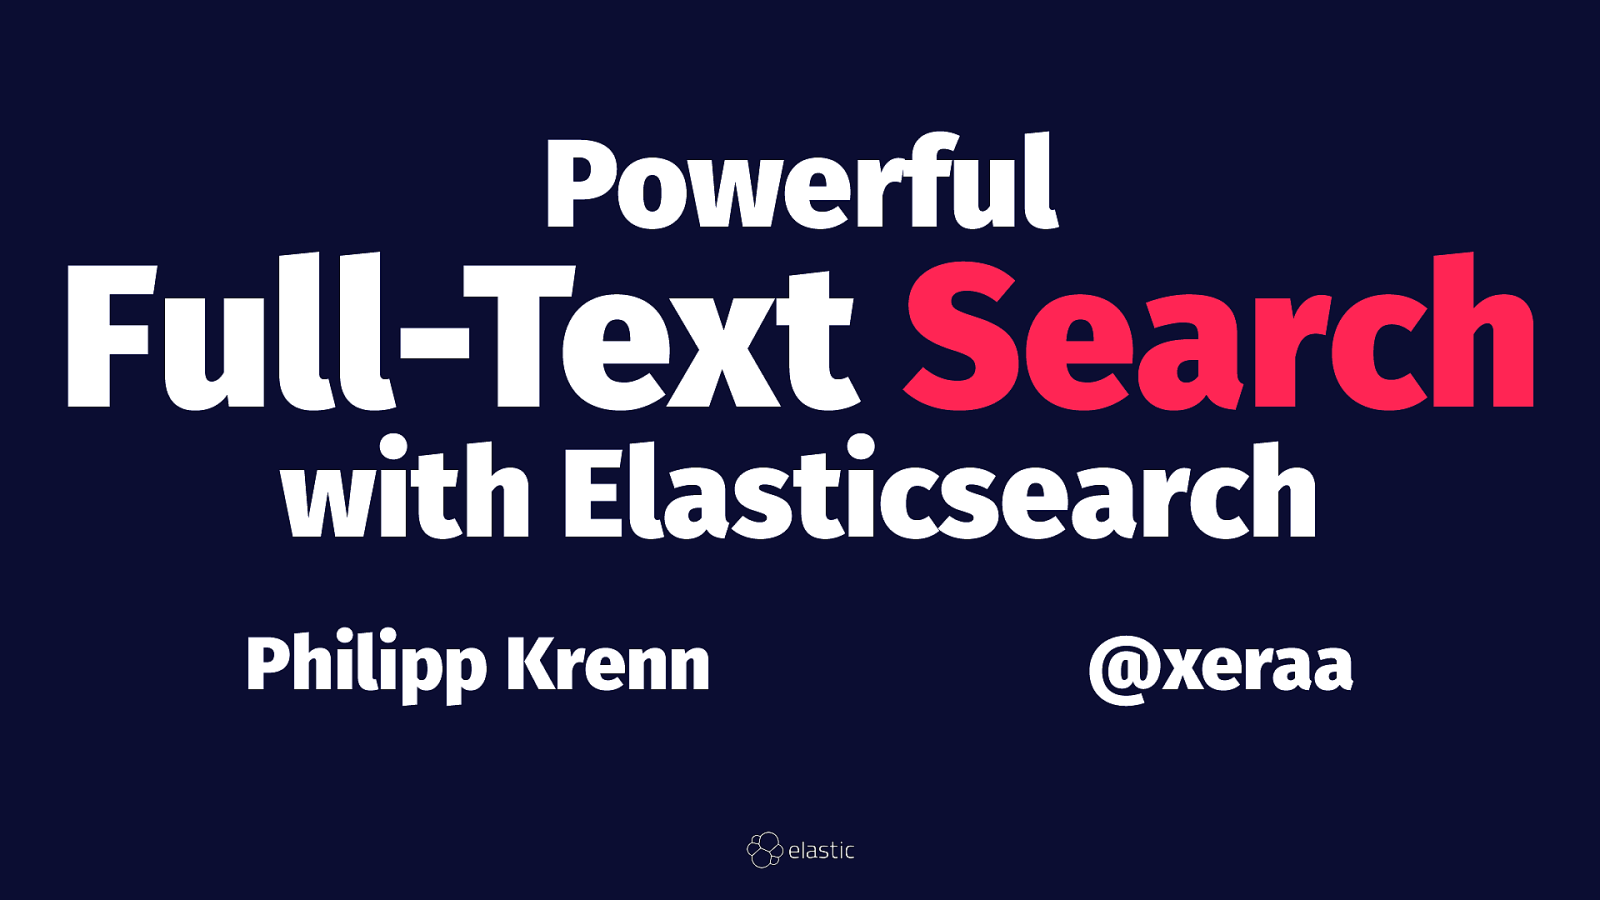 Powerful Full-Text Search with Elasticsearch